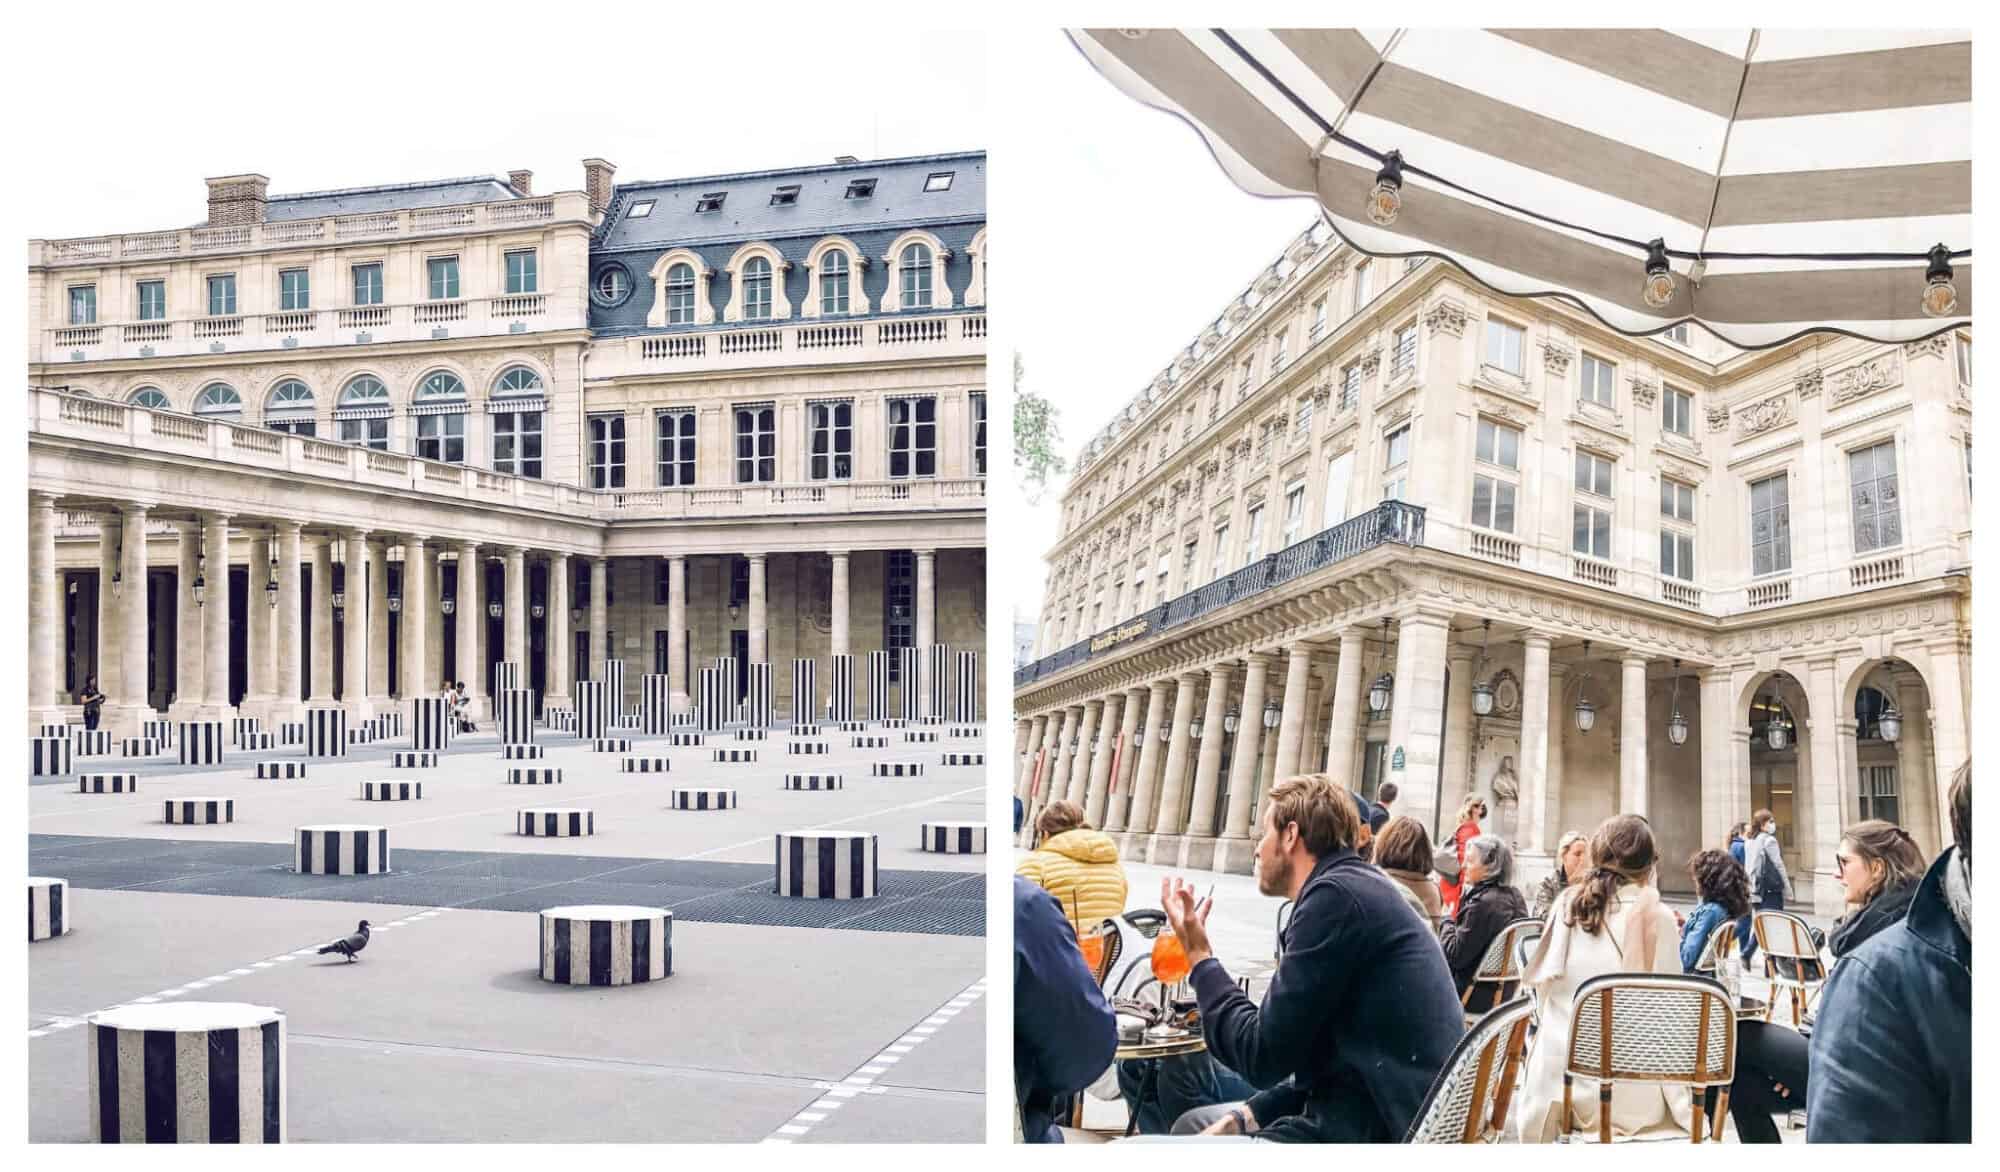 Left: Inside Paris' Jardin du Palais Royal urban park with black and white columns for seating; Right: Parisian seated in Cafe Le Nemours, right beside Jardin du Palais Royal.